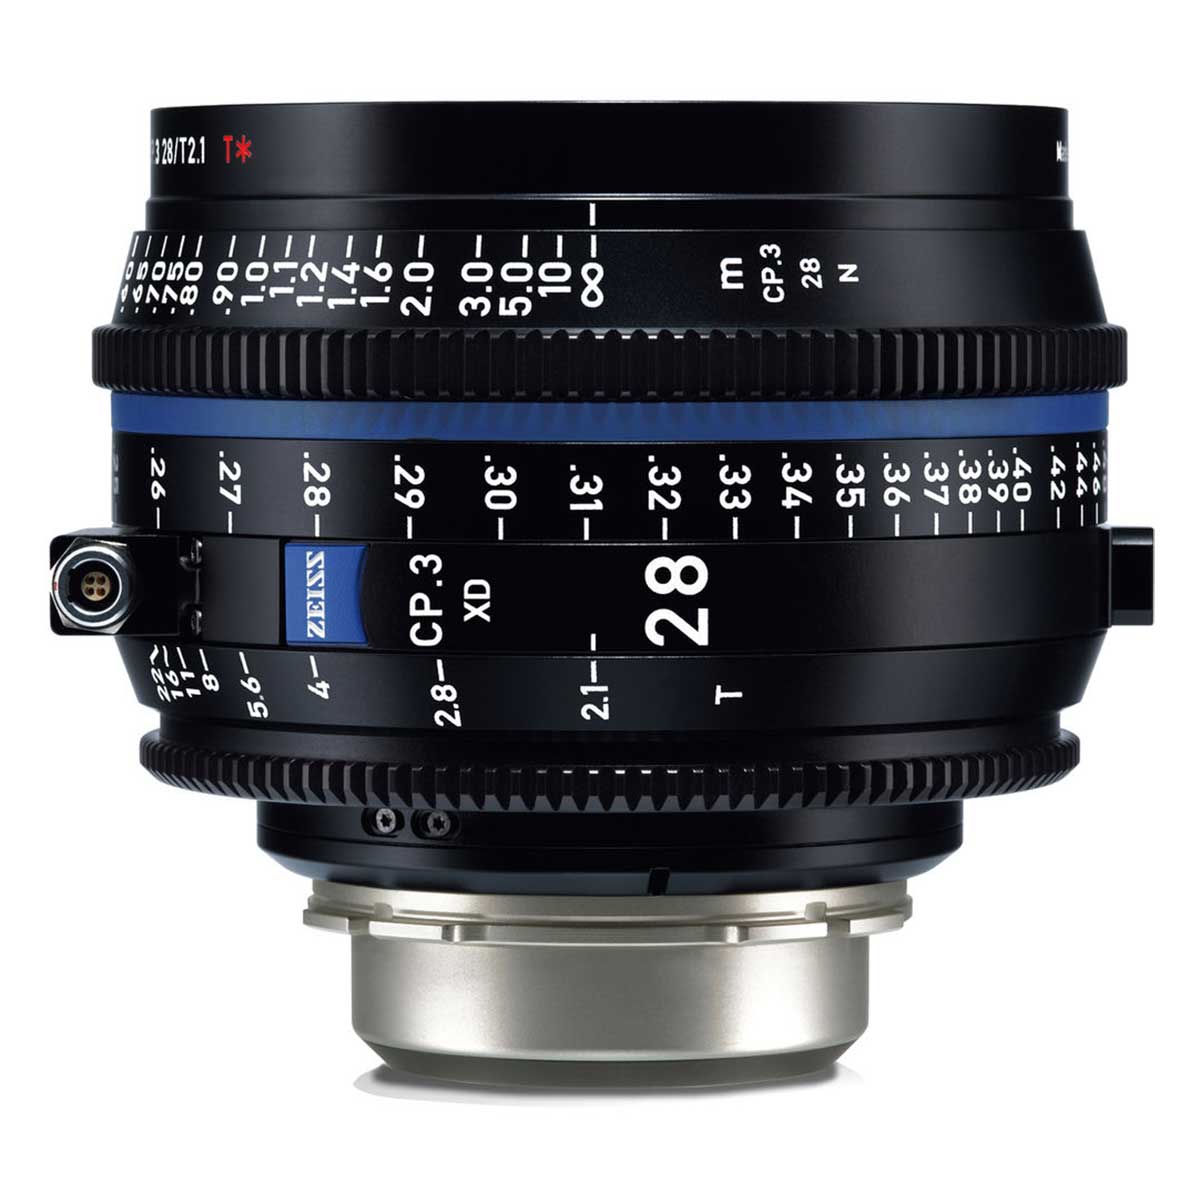 Carl Zeiss CompactPrime3 XD 28mm T2.1